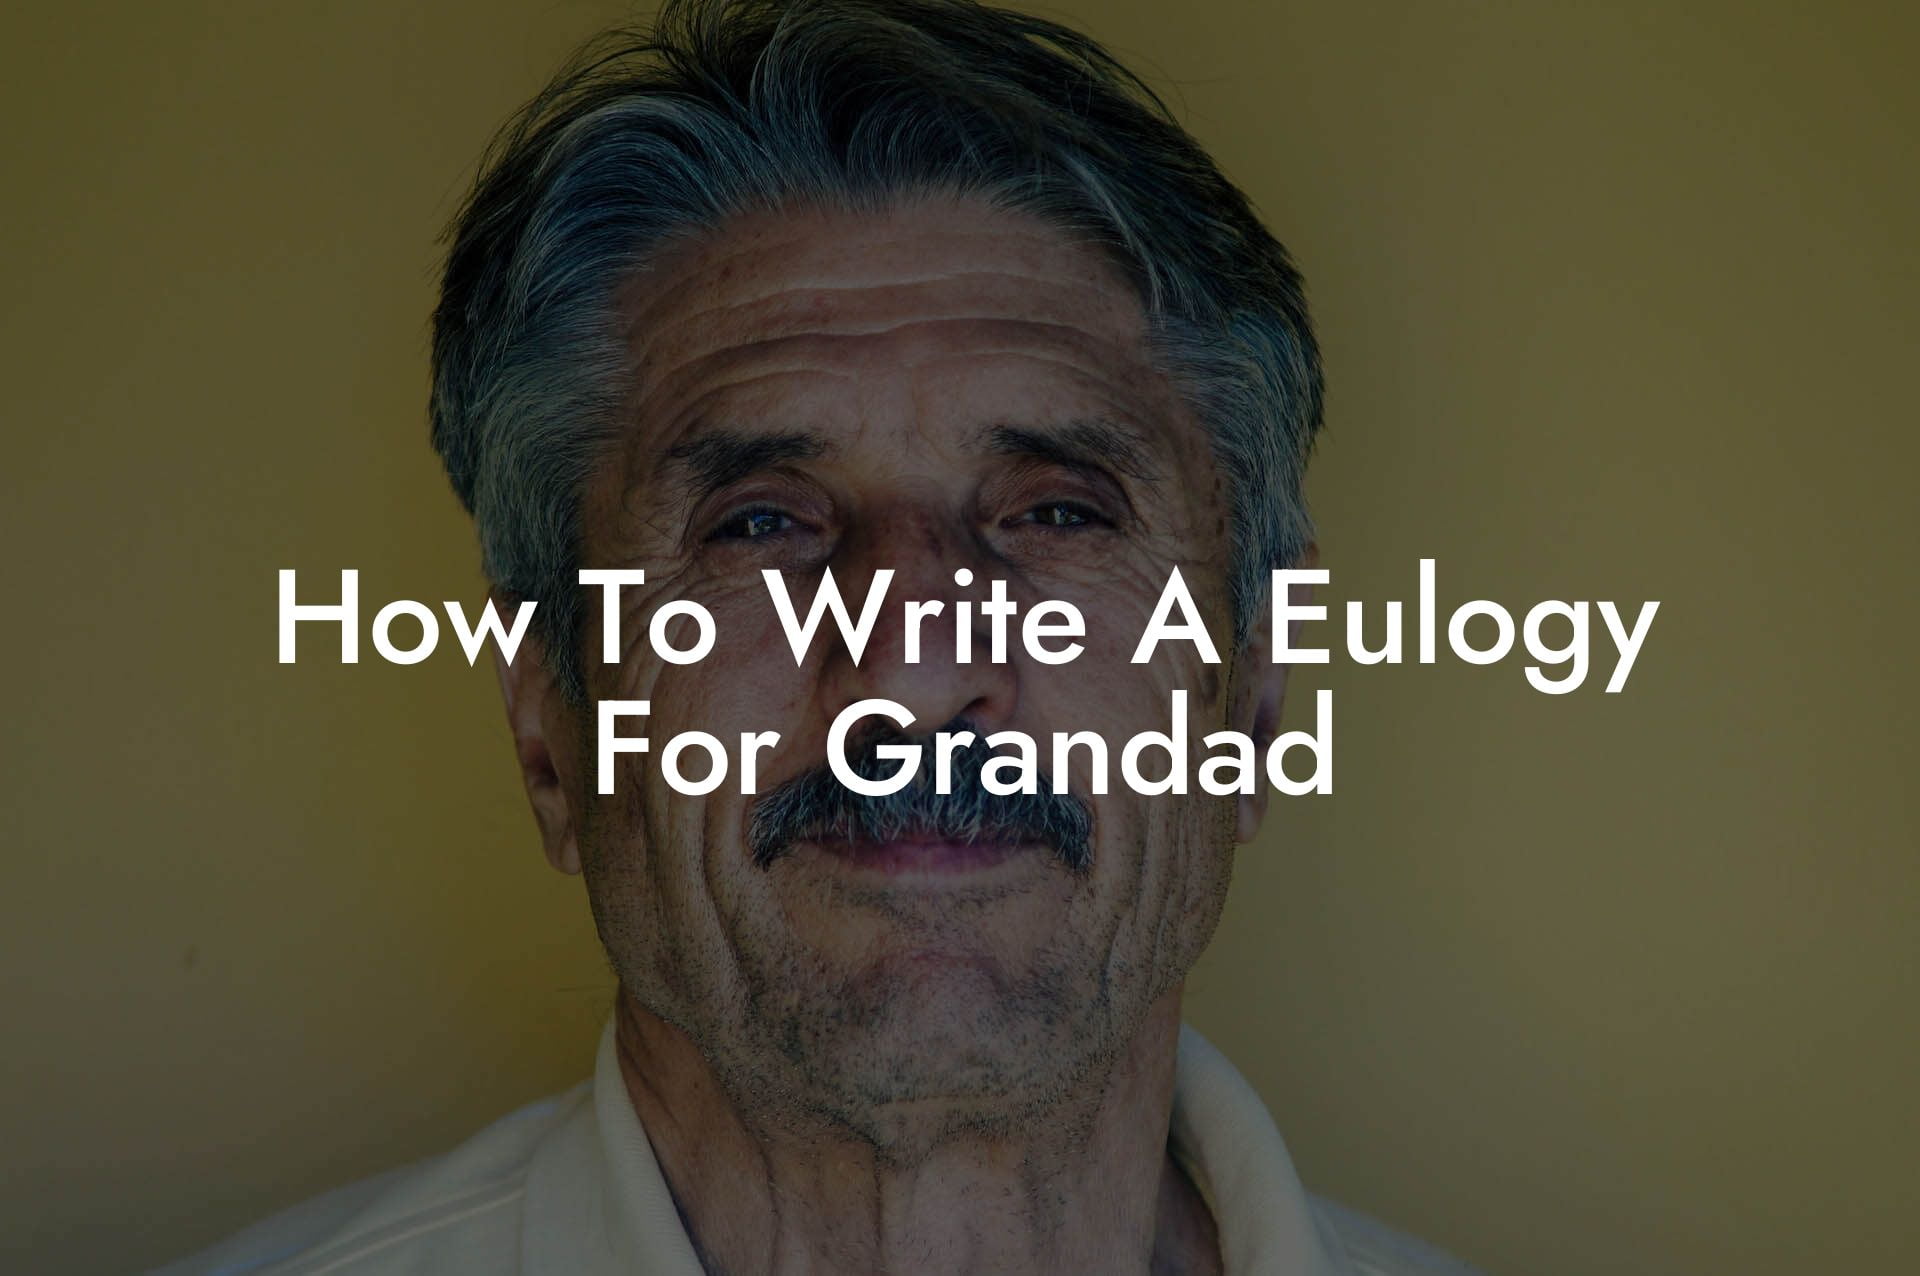 How To Write A Eulogy For Grandad